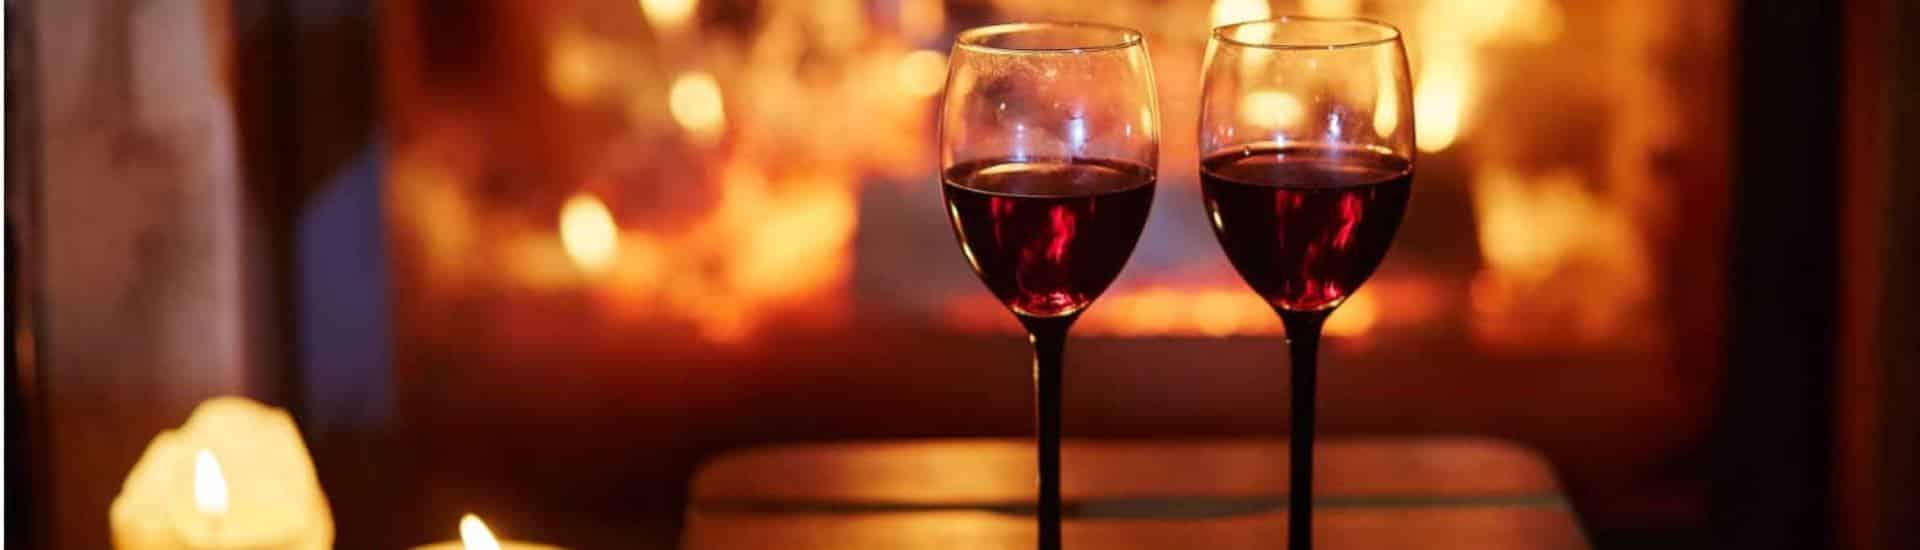 Two wine glasses filled with red wine with fireplace blurred in the background